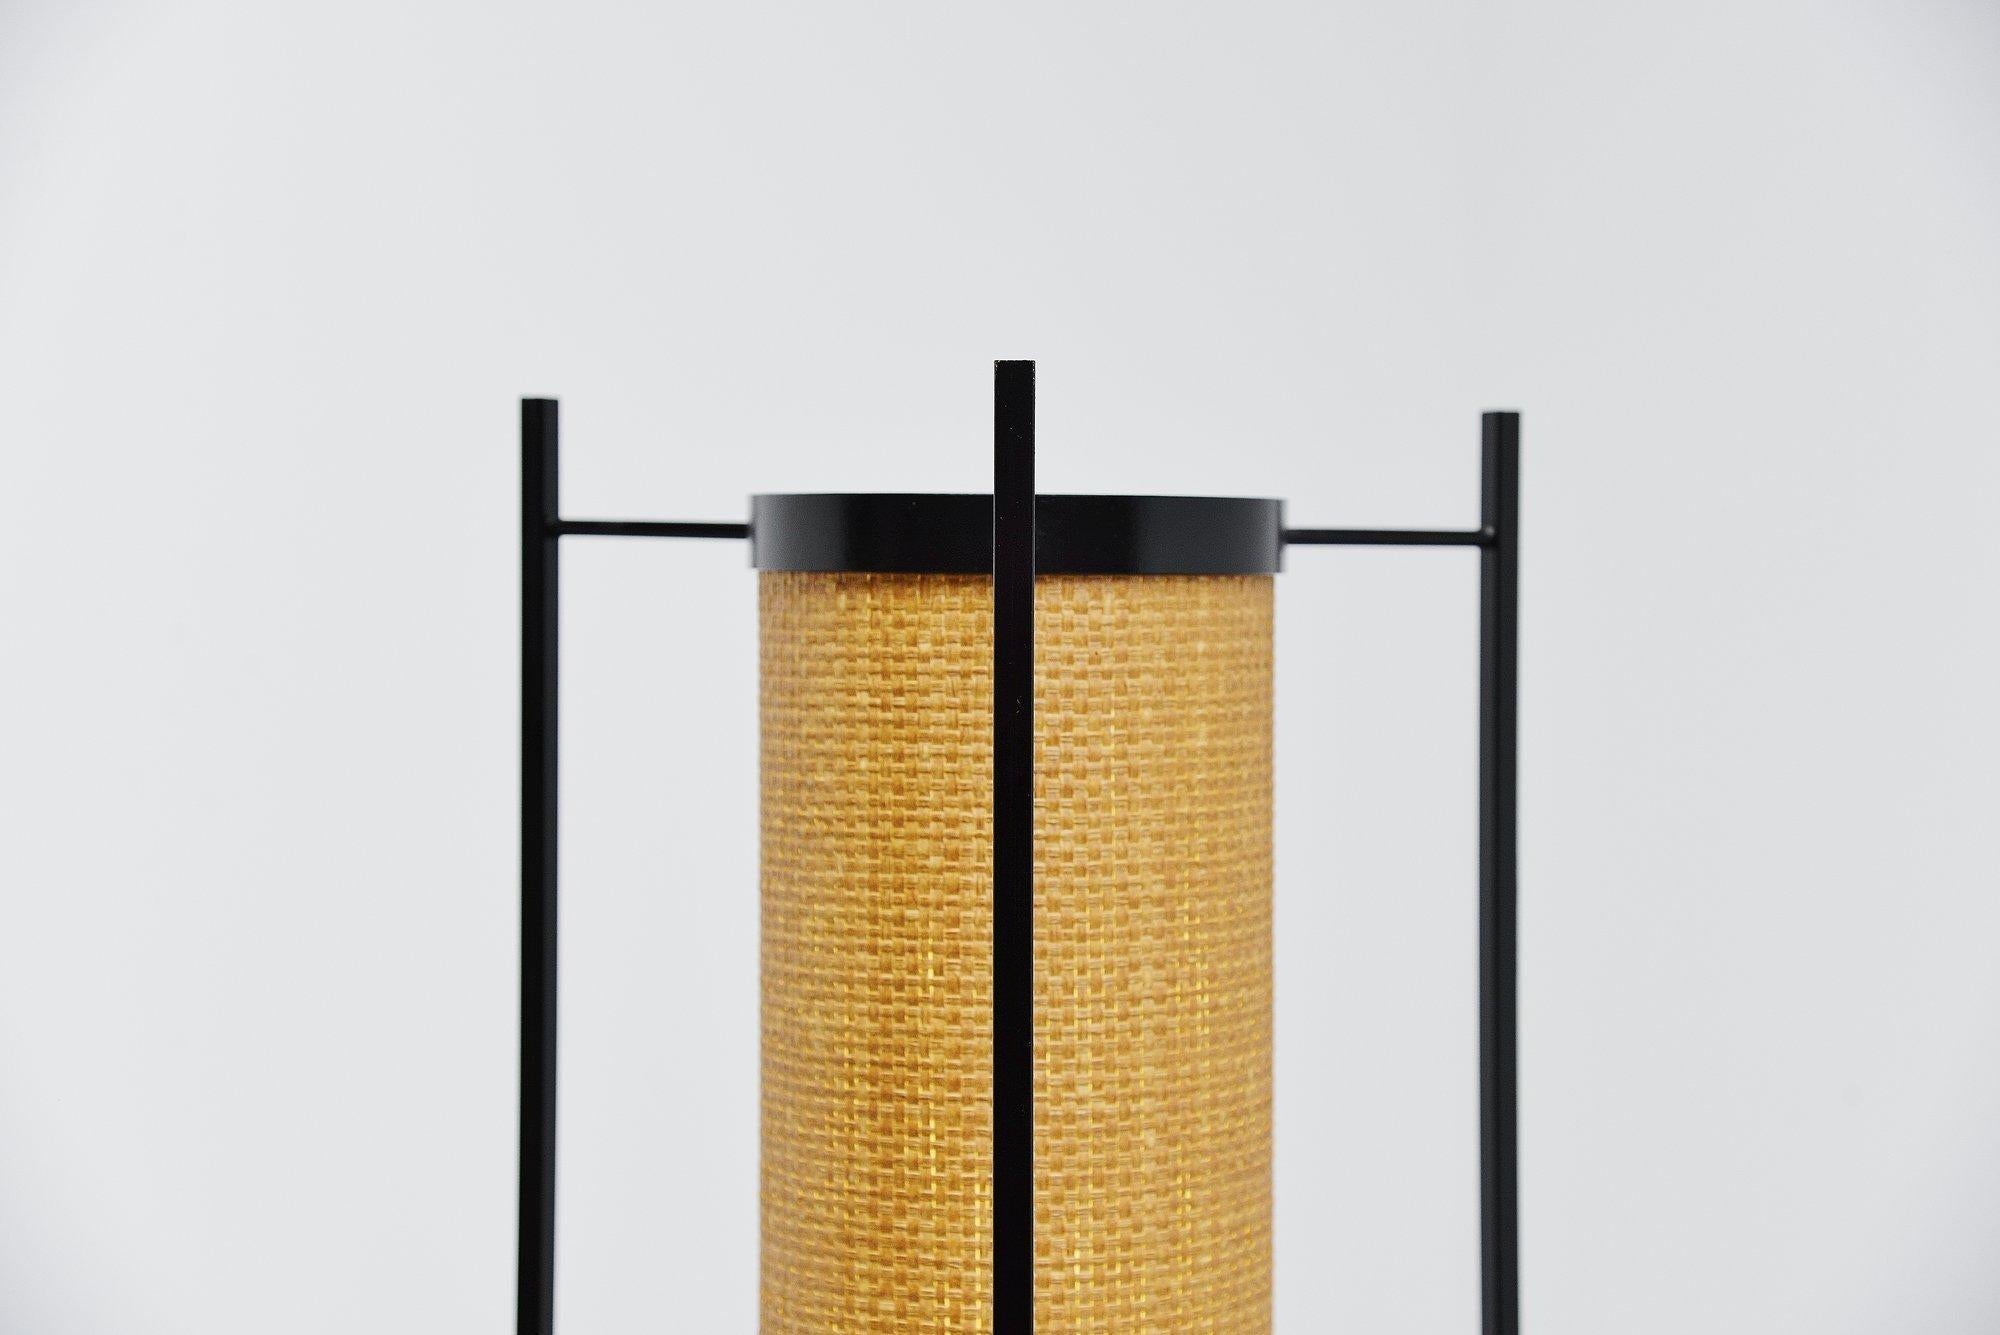 Magnificent modernist floor lamp model K46 designed by Kho Liang Ie and manufactured by Artiforte, Holland 1957. This very hard to find lamp has a very nice Japanese minimalistic look, 3 square black lacquered solid metal bars holding a rattan shade